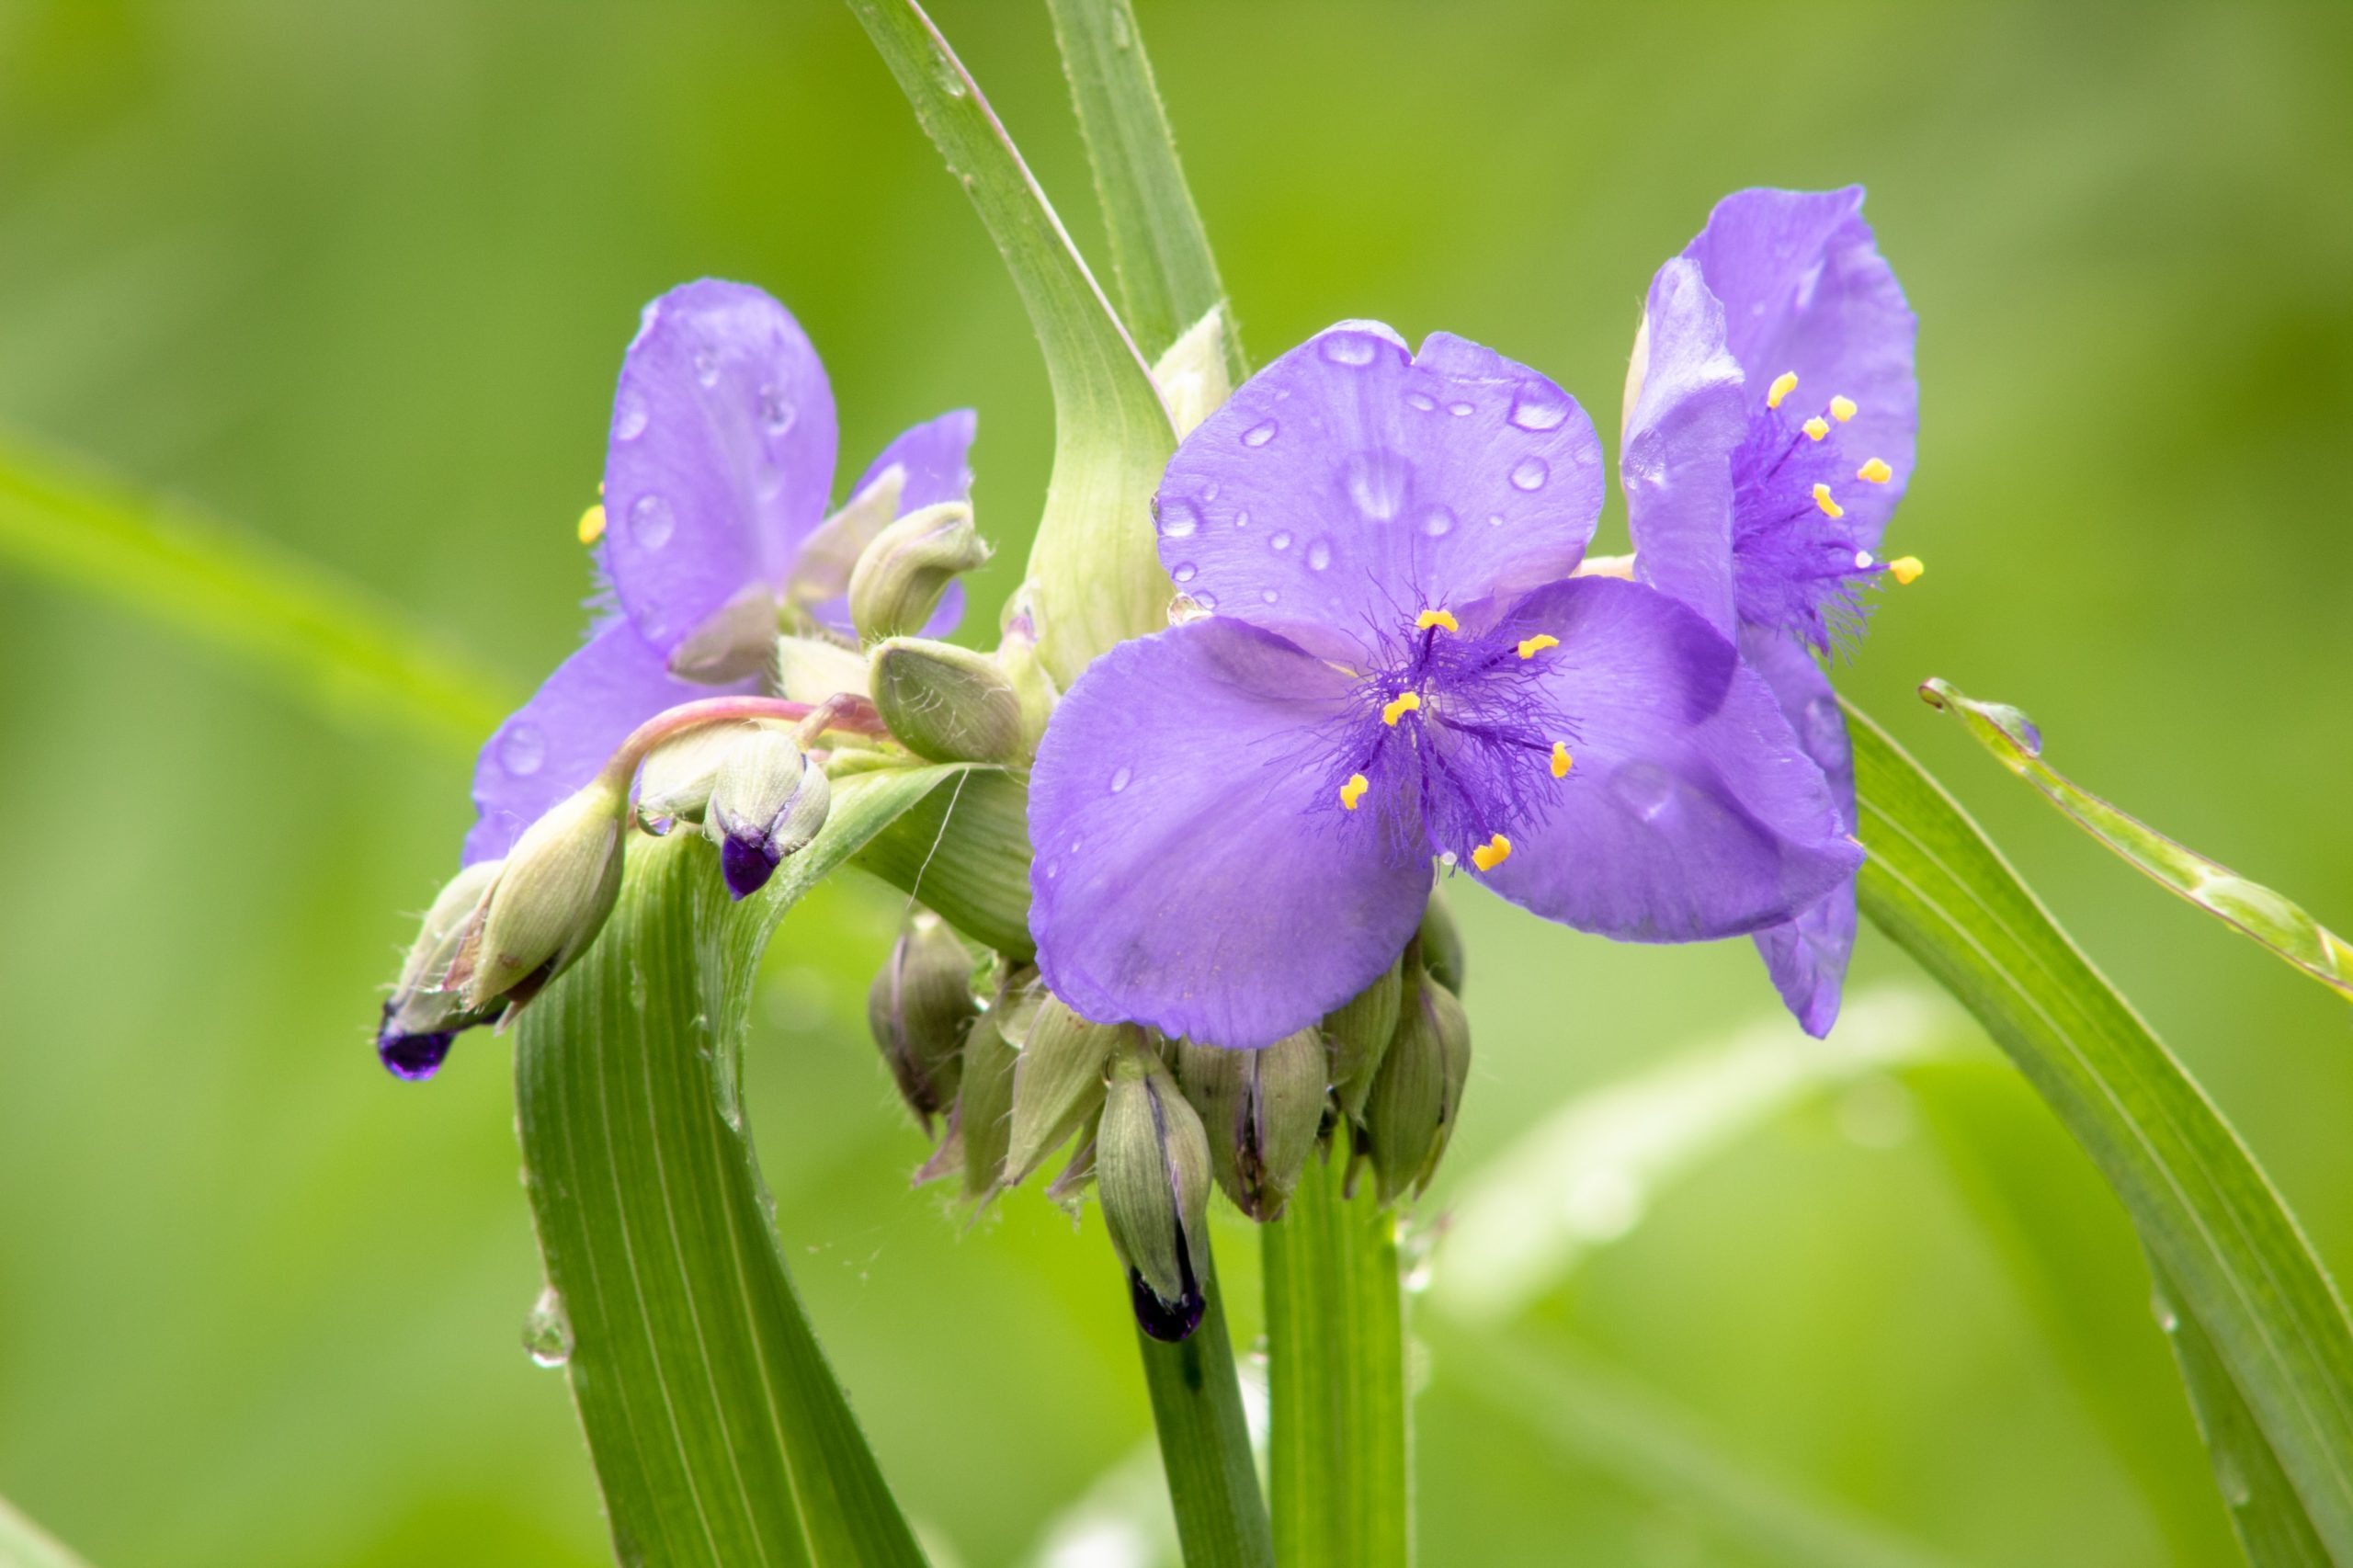 Spiderwort located in the interpretive garden at the Lewis and Clark National Historic Trail Visitor's Center